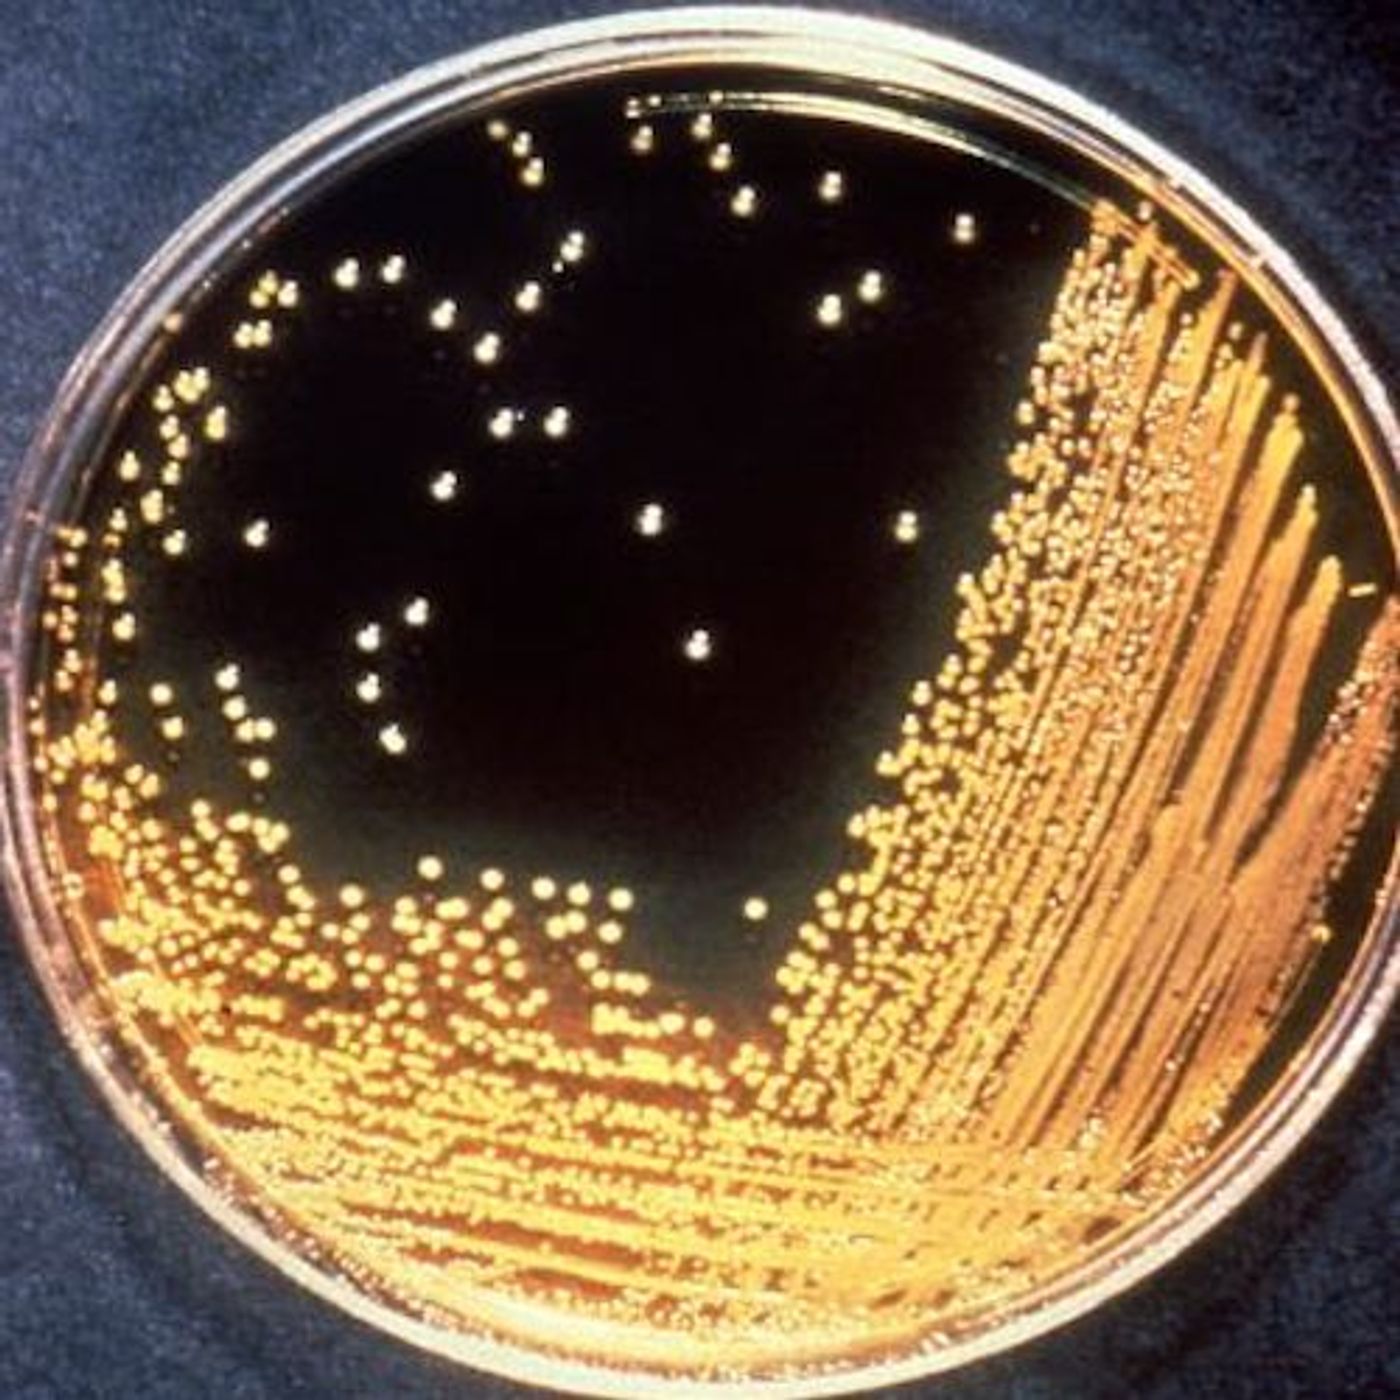 Vibrio choelrae grows in a dish / Image credit: Pixnio